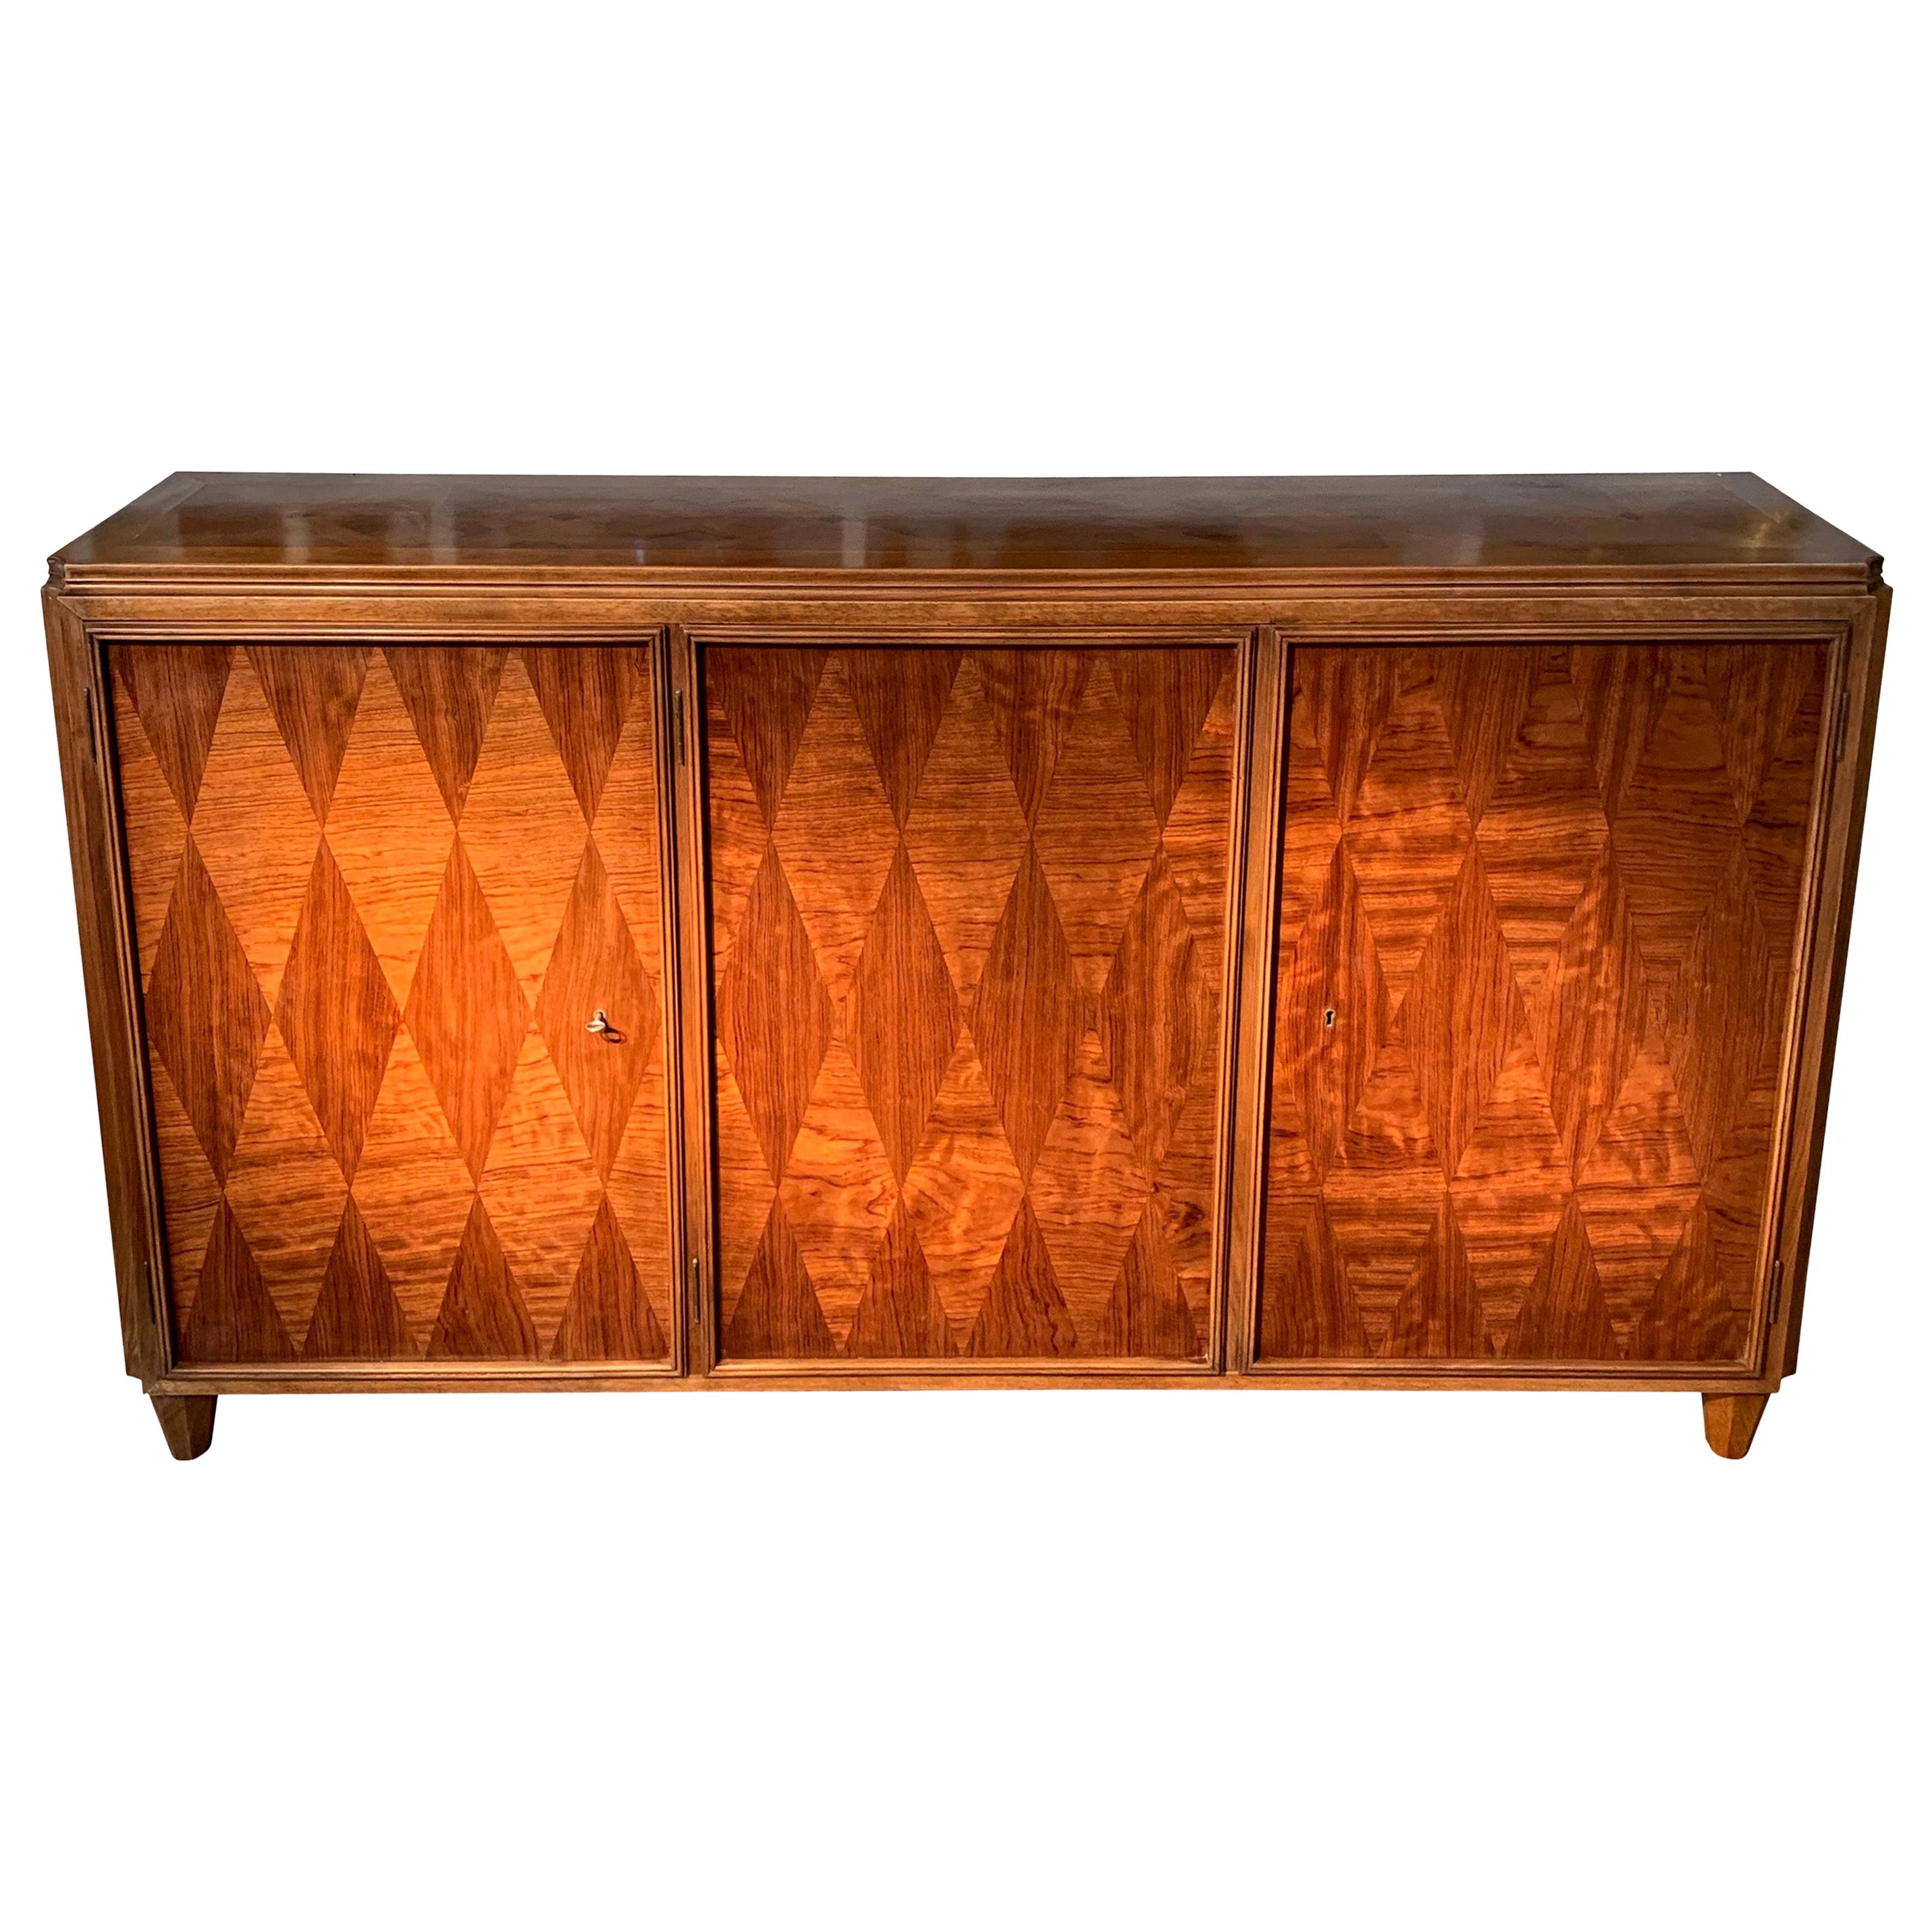 Walnut Parquet and Inlaid Top Credenza in the Style of Osvaldo Borsani, 1930s